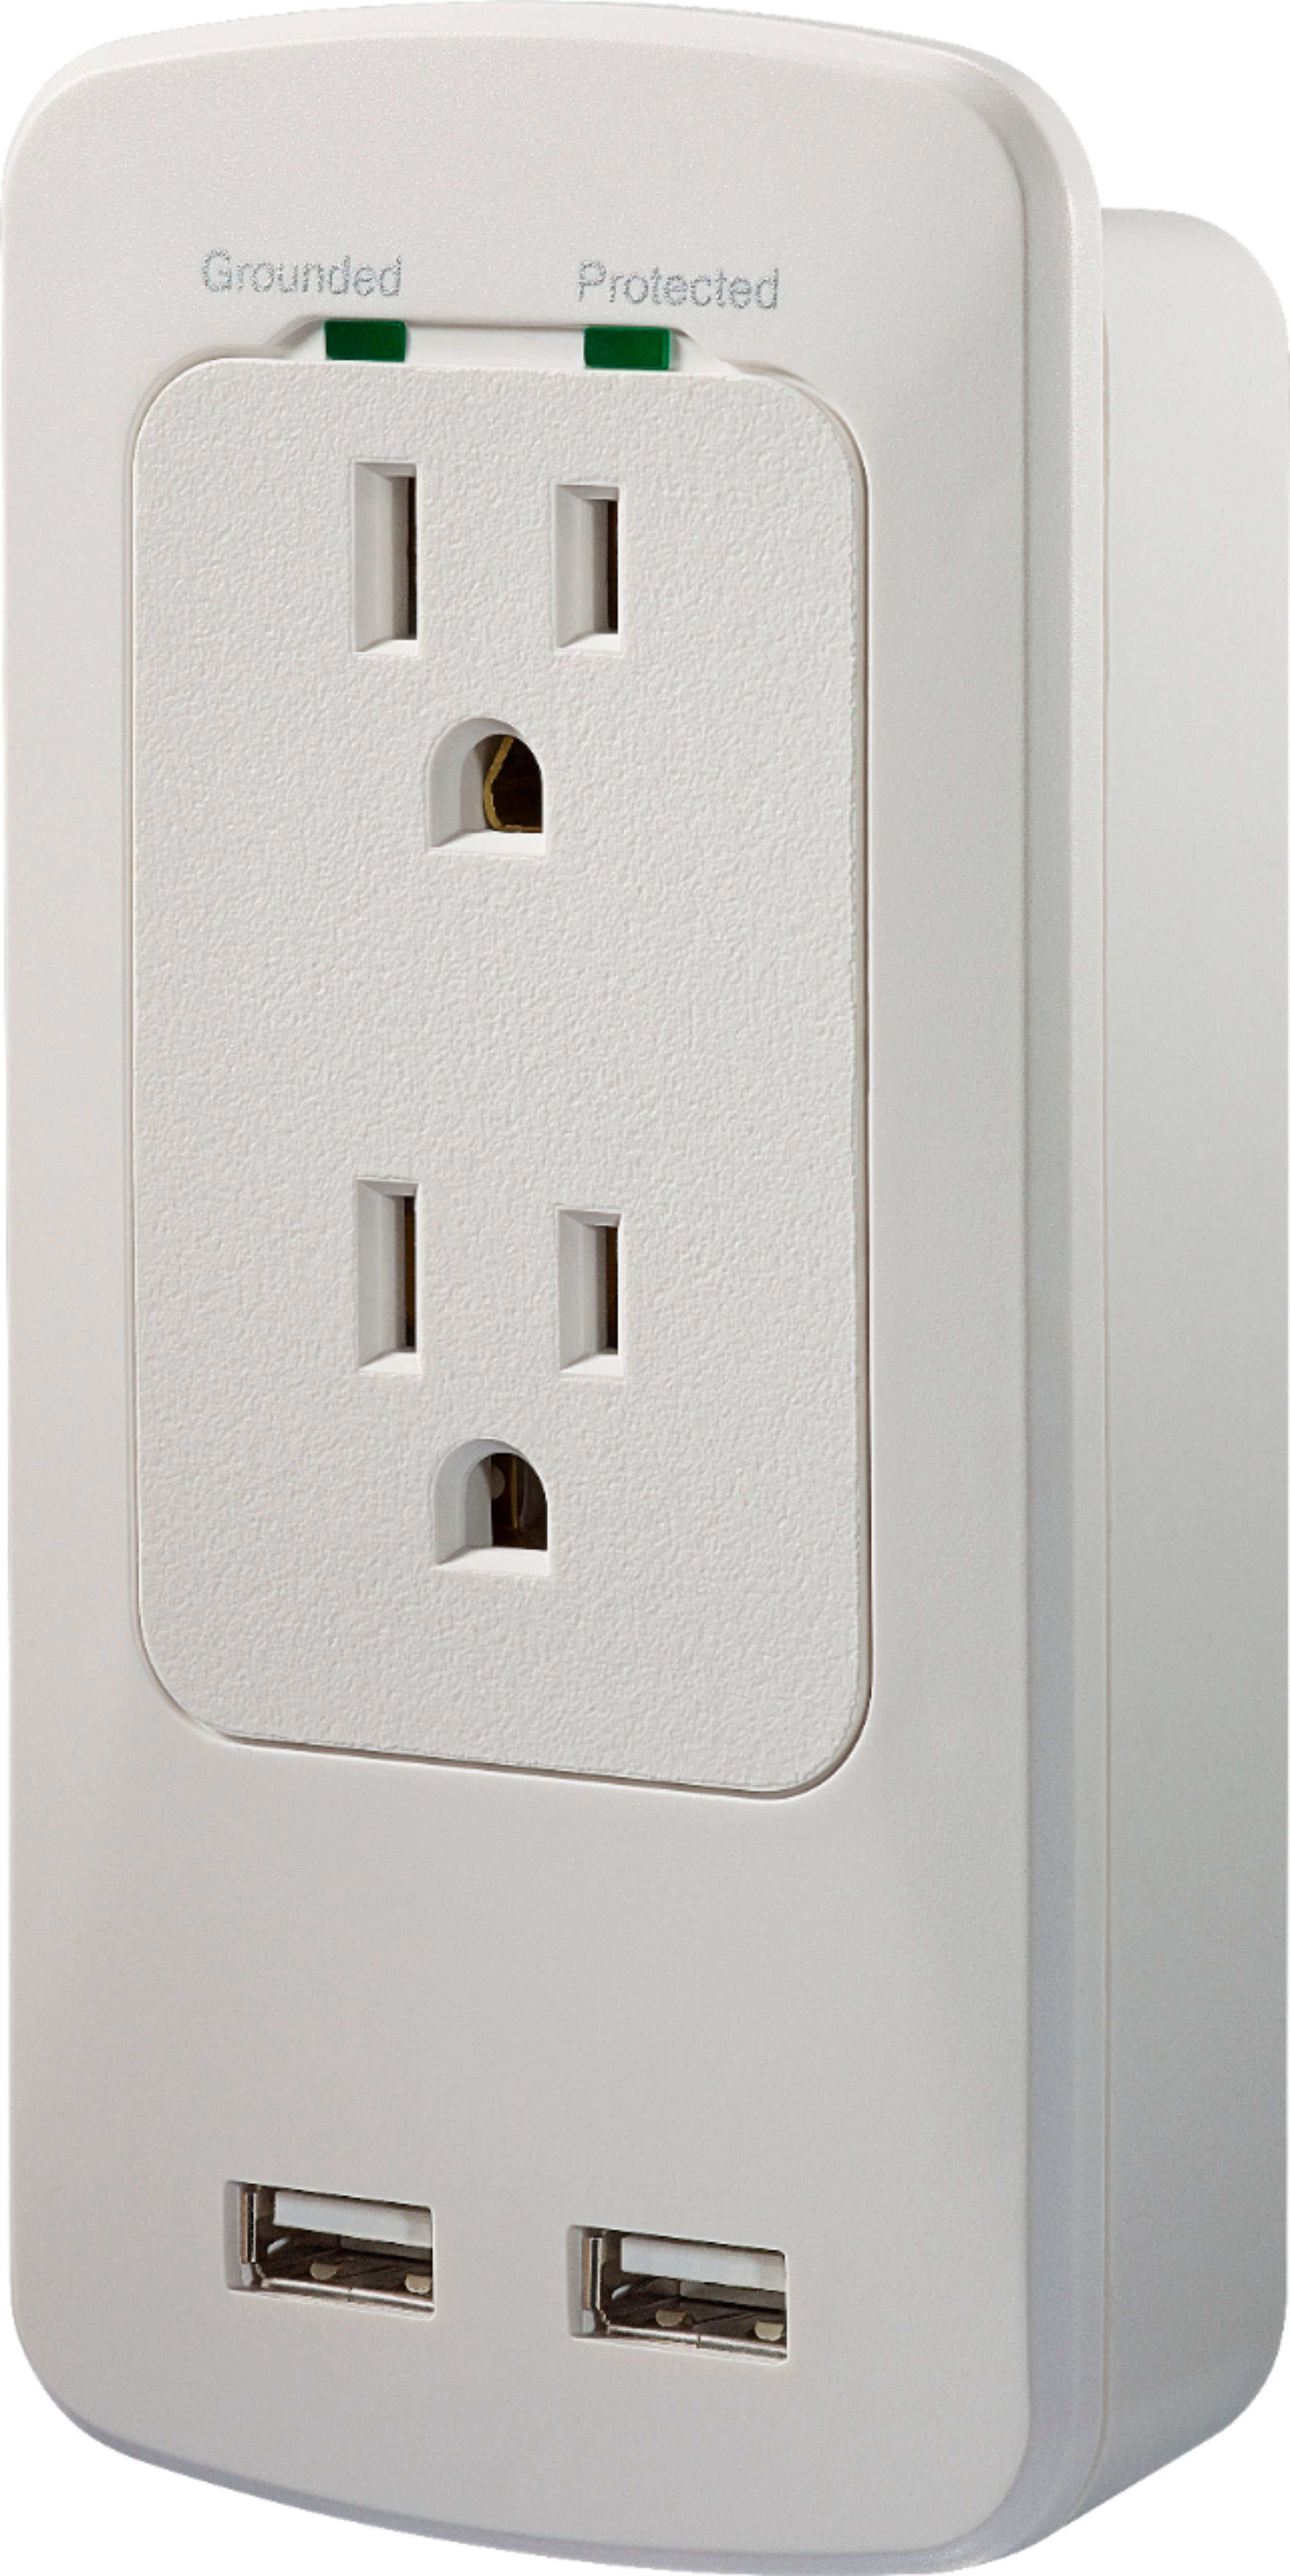 Insignia™ - 2-Outlet/2-USB Wall Tap Surge Protector - White